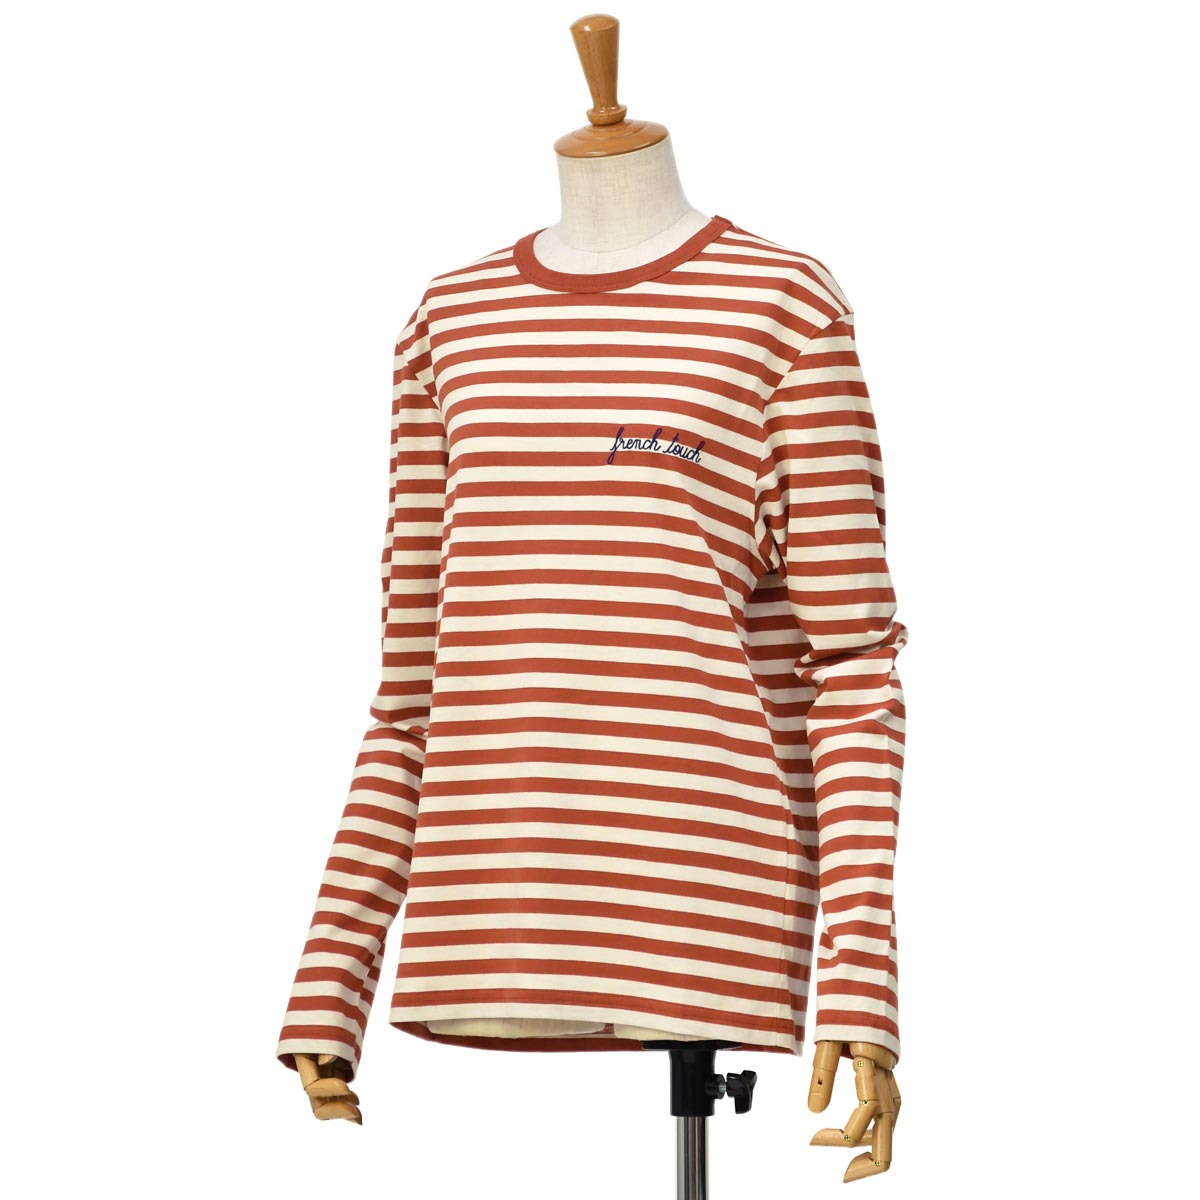 Maison Labiche【メゾン ラビッシュ】長袖ボーダーカットソー FRENCH TOUCH OFF WHITE KETCHUP オフホワイト レッド